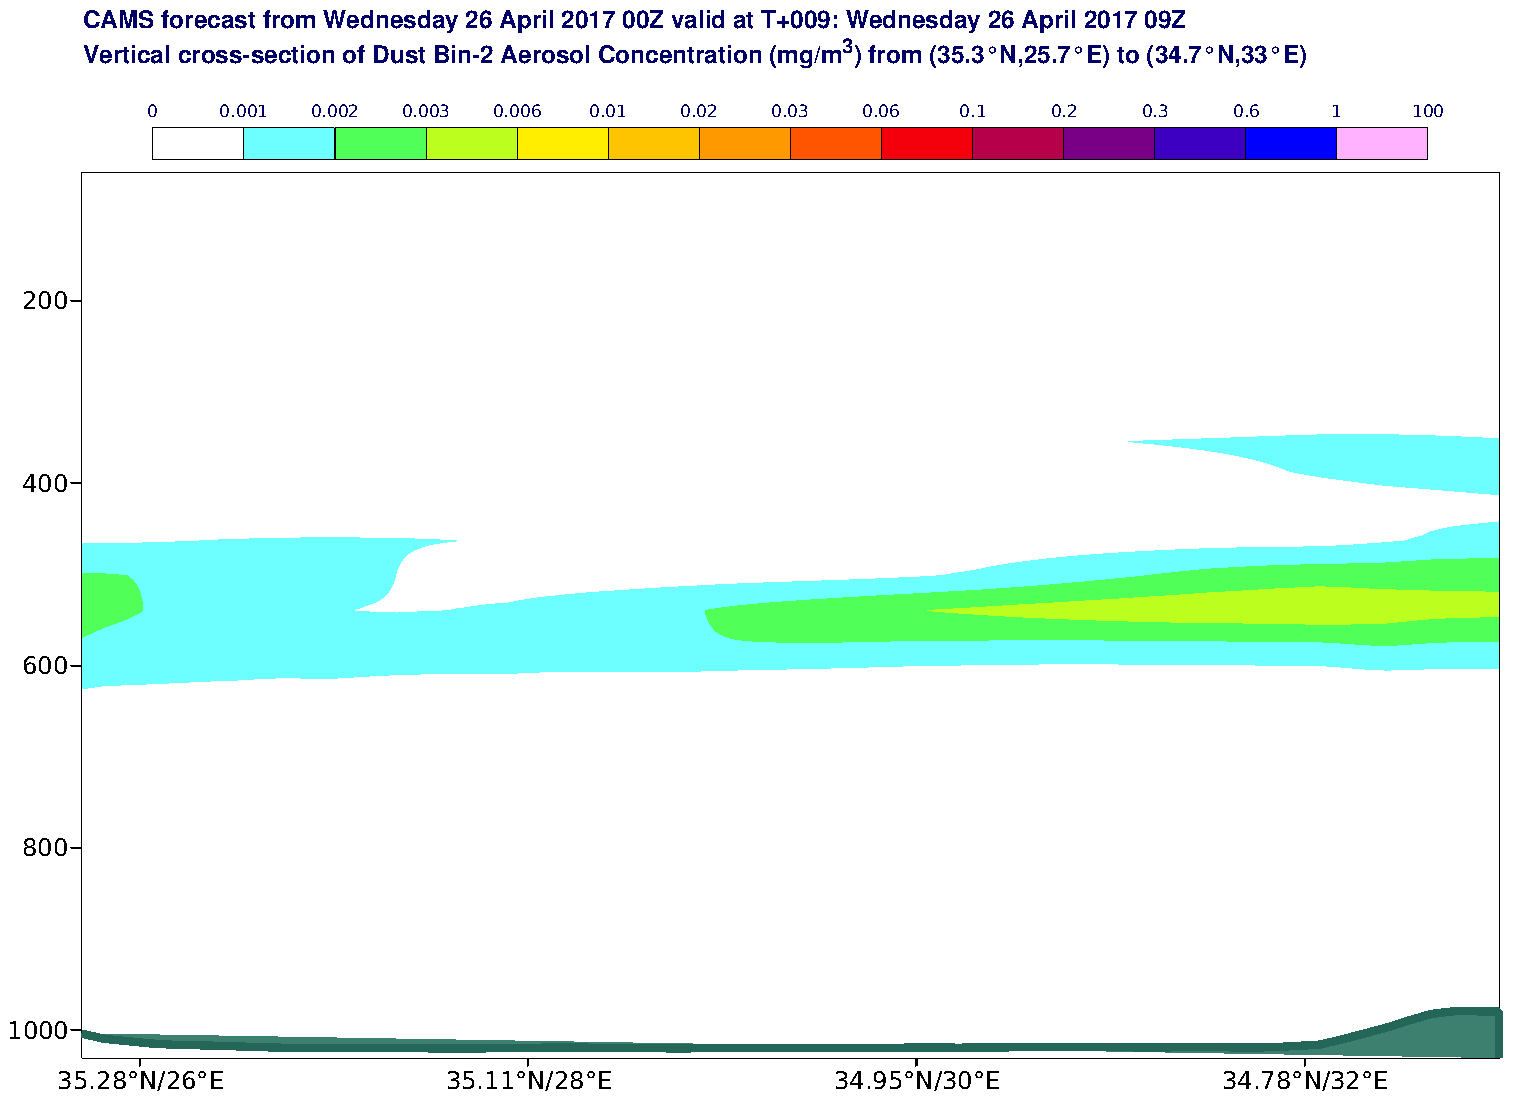 Vertical cross-section of Dust Bin-2 Aerosol Concentration (mg/m3) valid at T9 - 2017-04-26 09:00